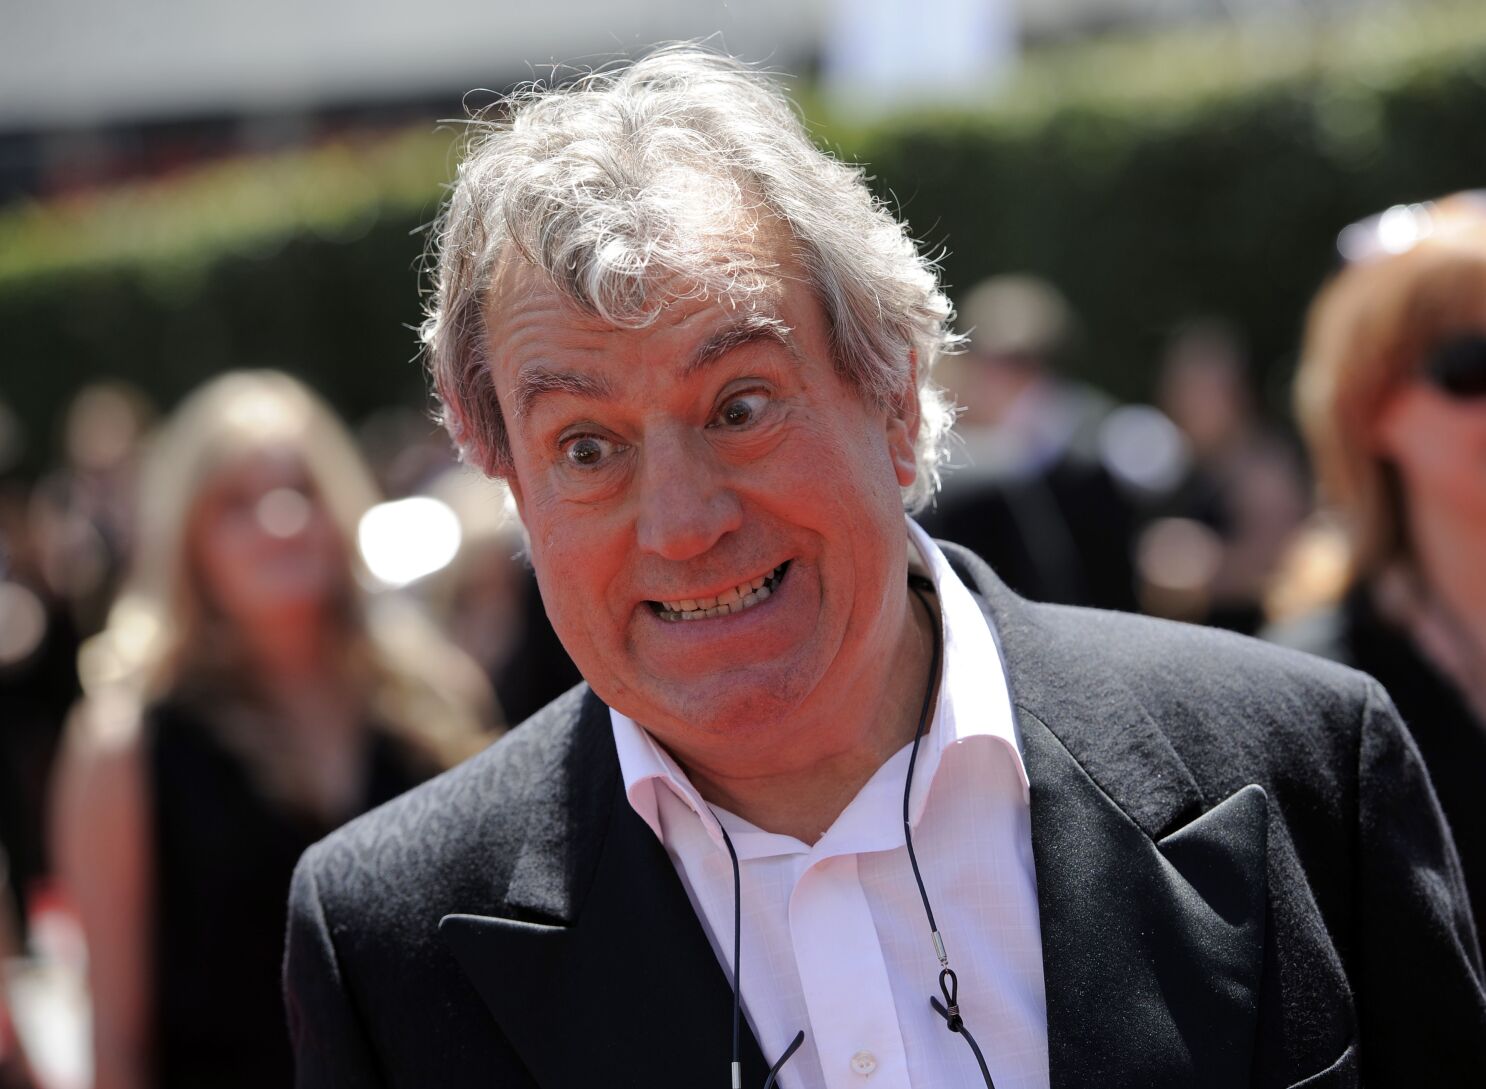 Terry Jones fondly remembered by his Monty Python costars